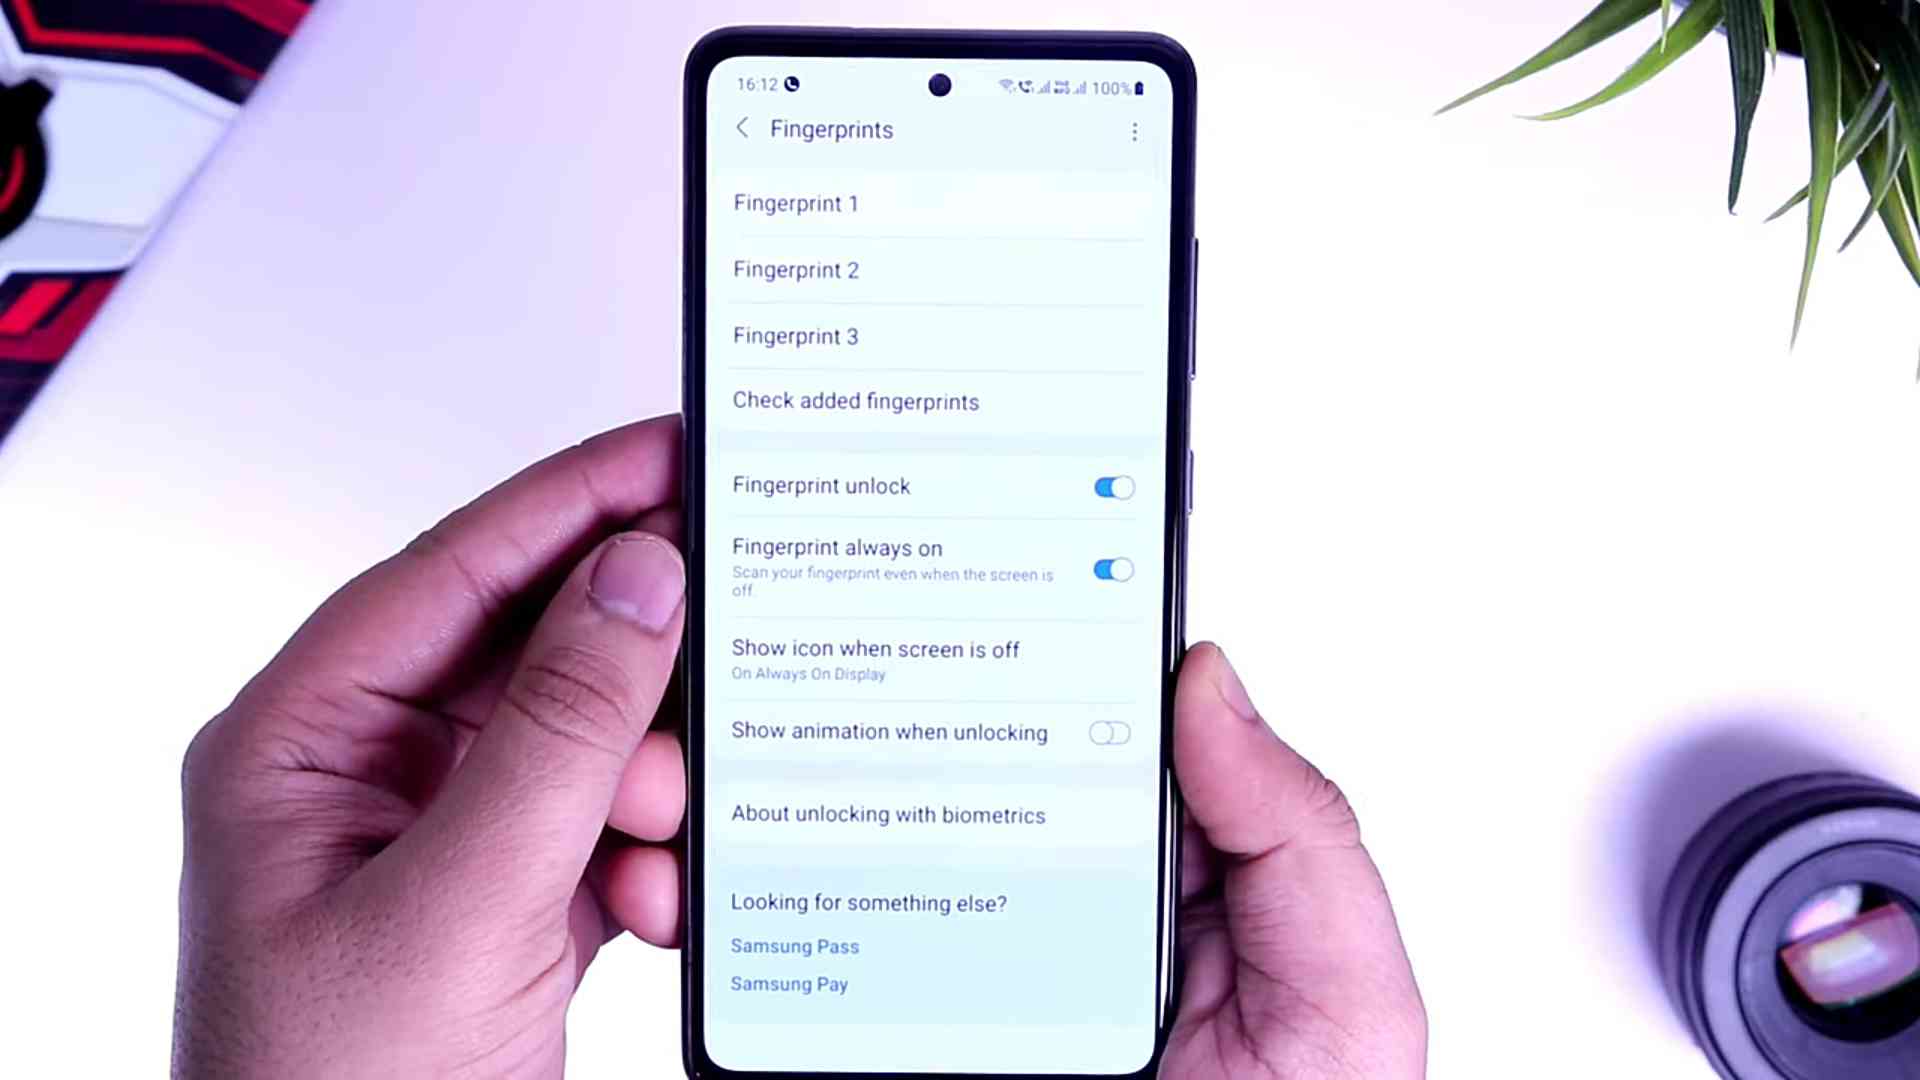 How to improve Samsung Galaxy A70, A70s, A71, and A72 fingerprint reader/scanner speed and accuracy.